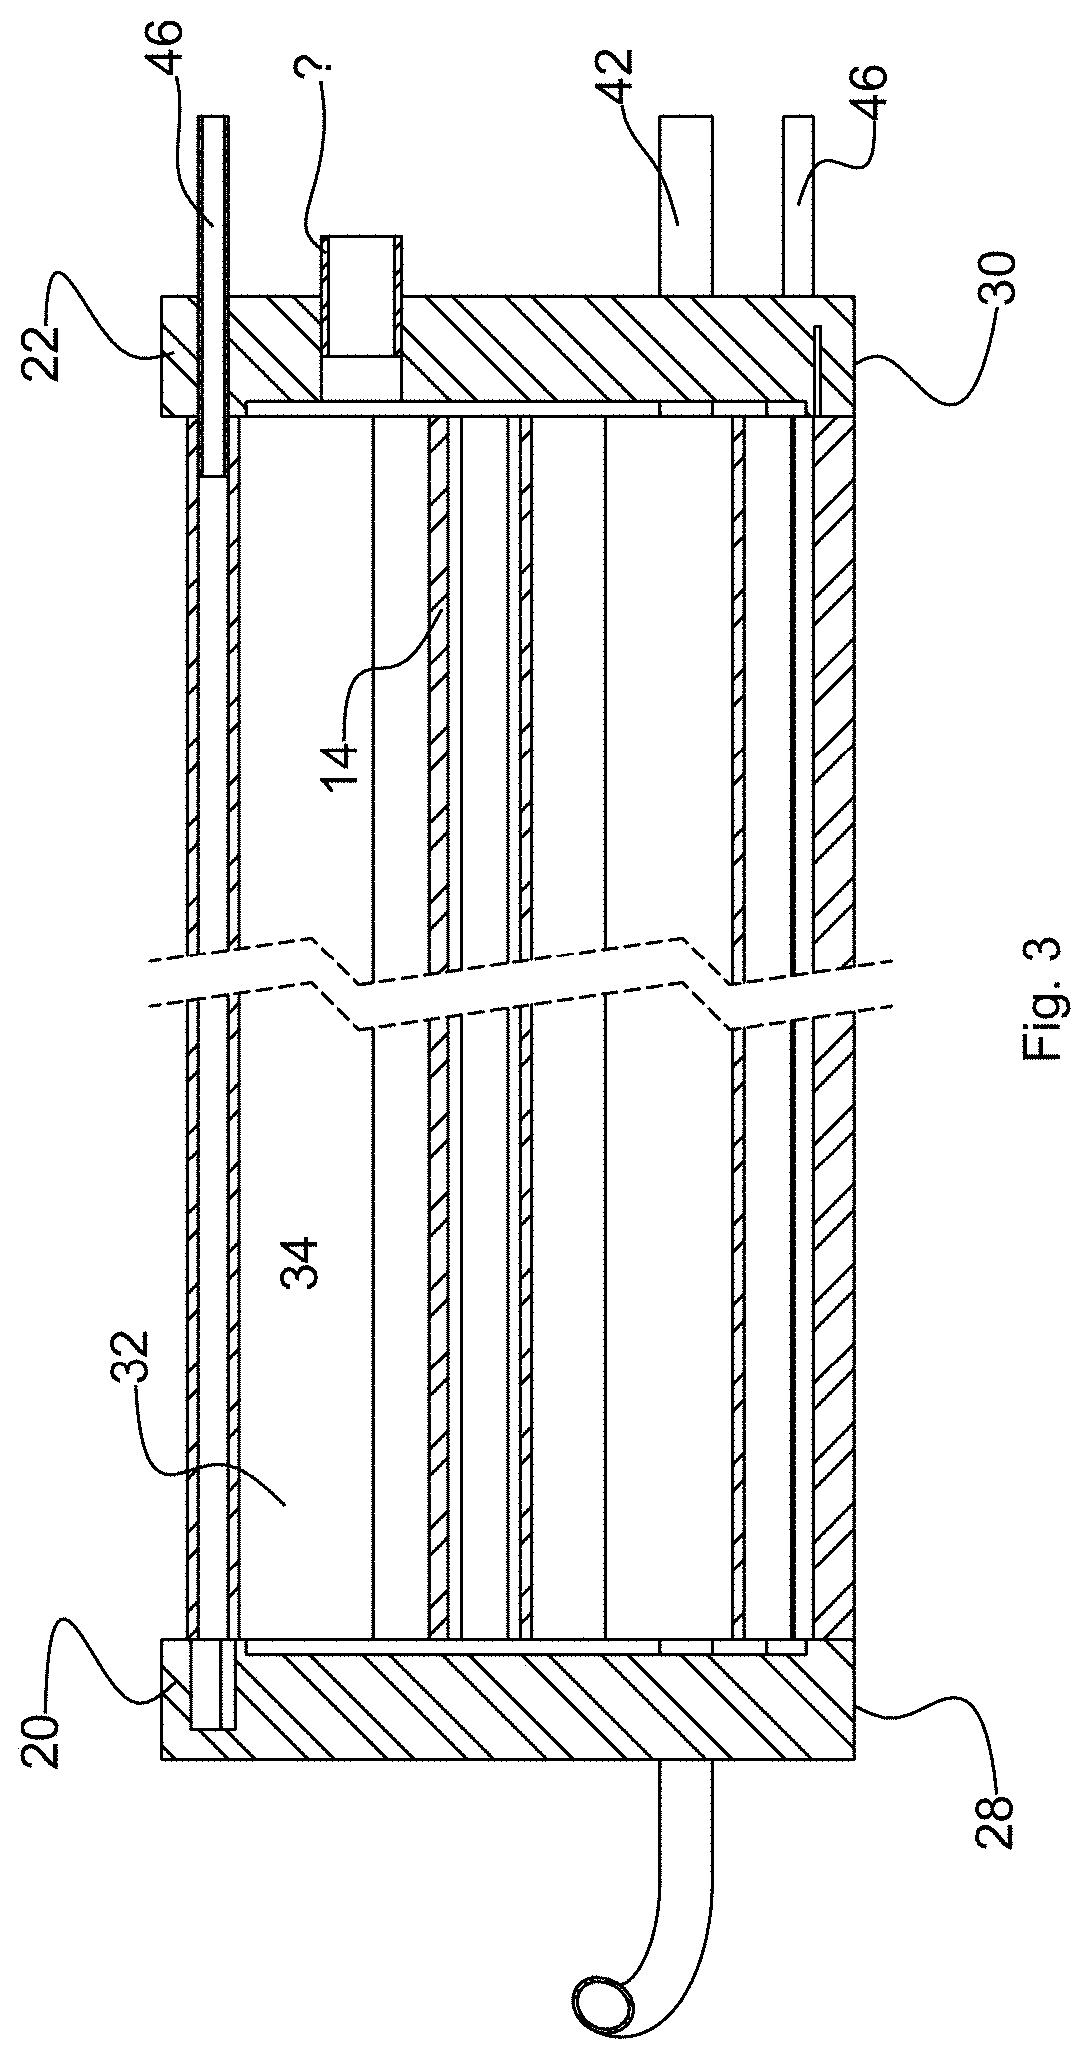 Apparatus and composition for cooling items with a contained phase change material